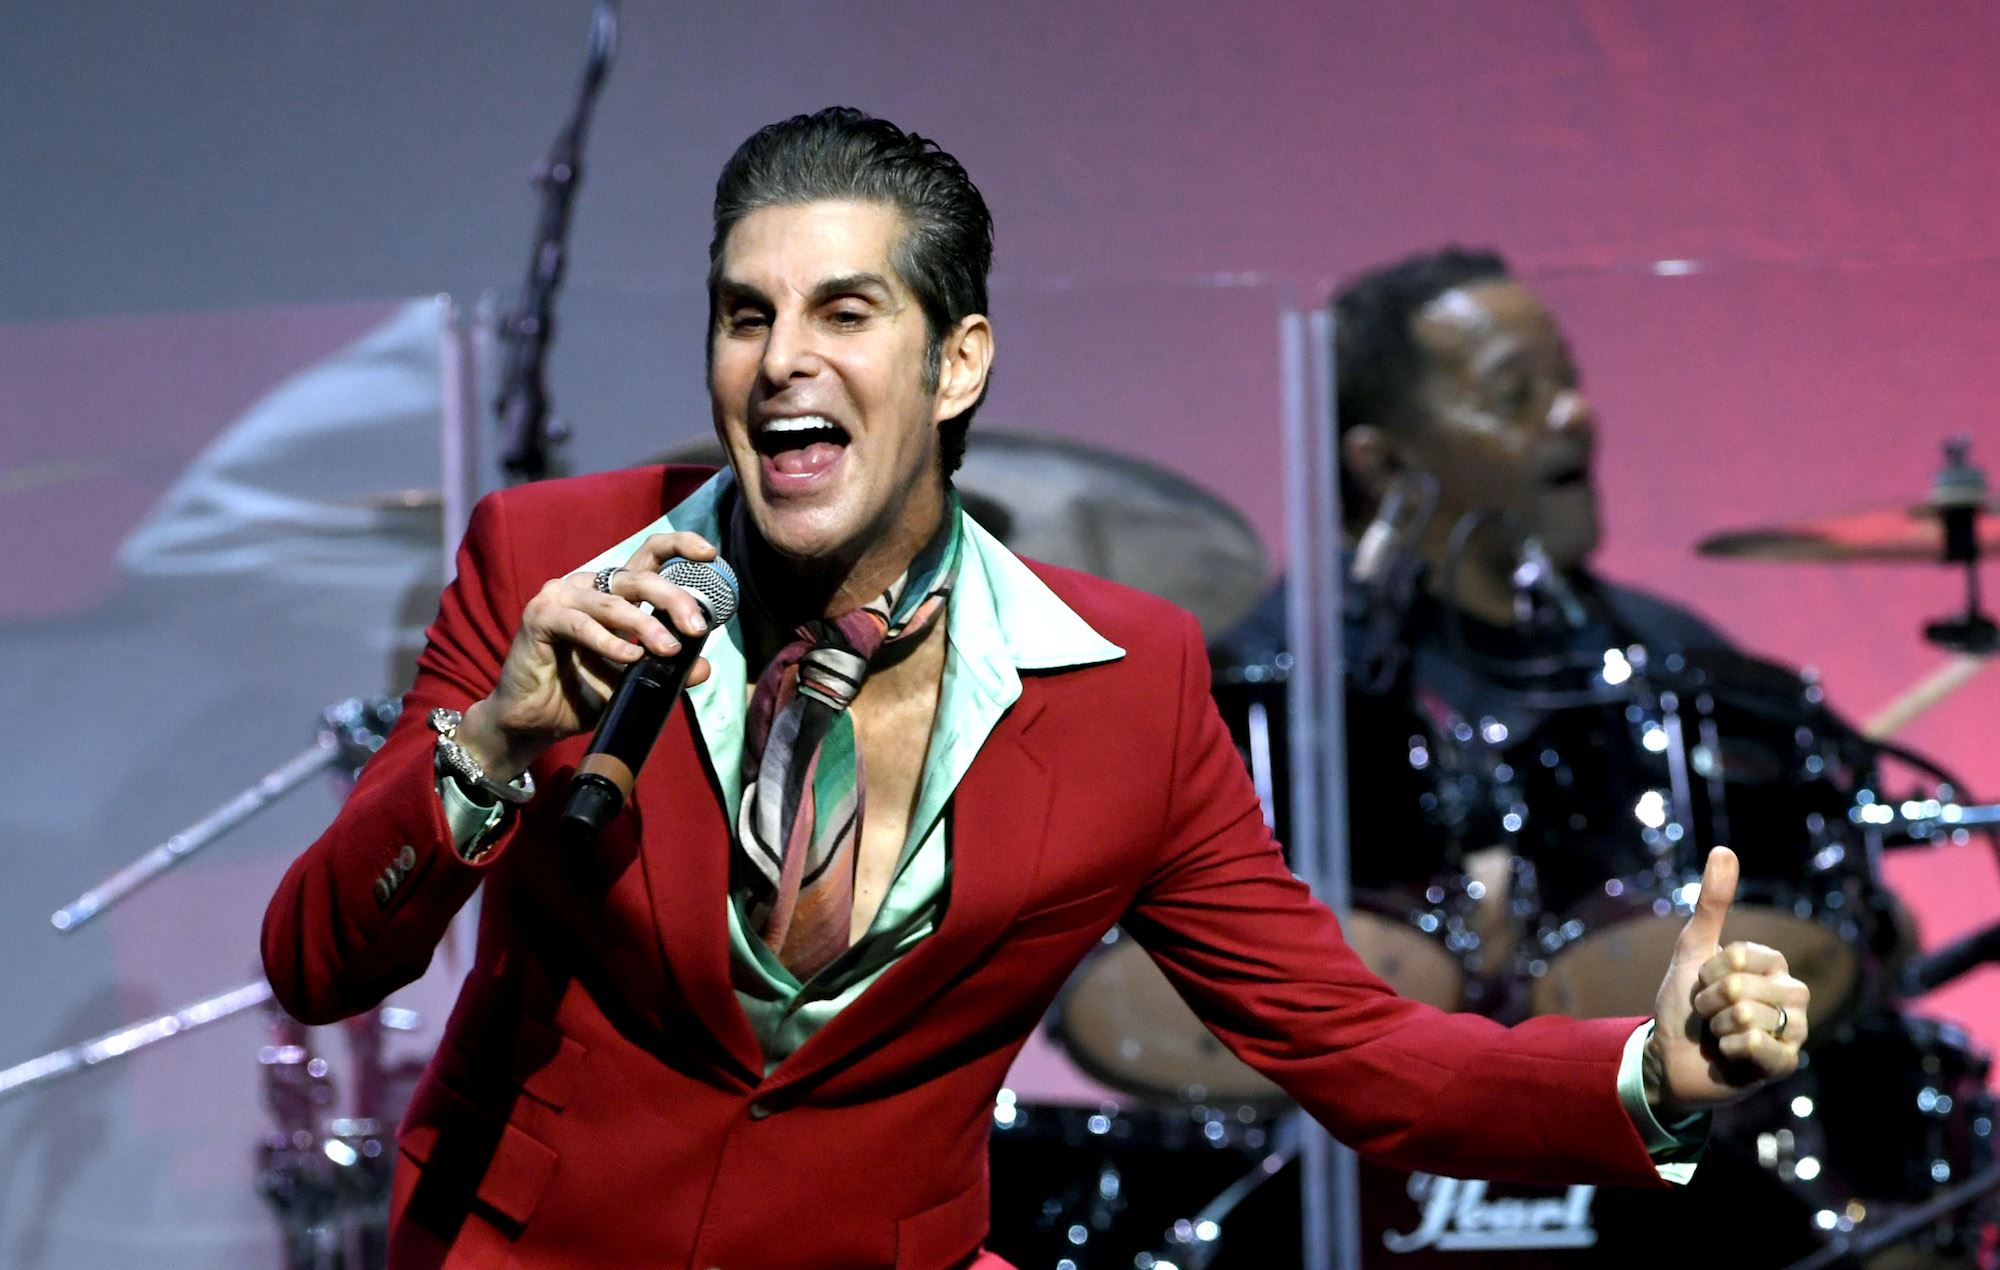 19-mind-blowing-facts-about-perry-farrell